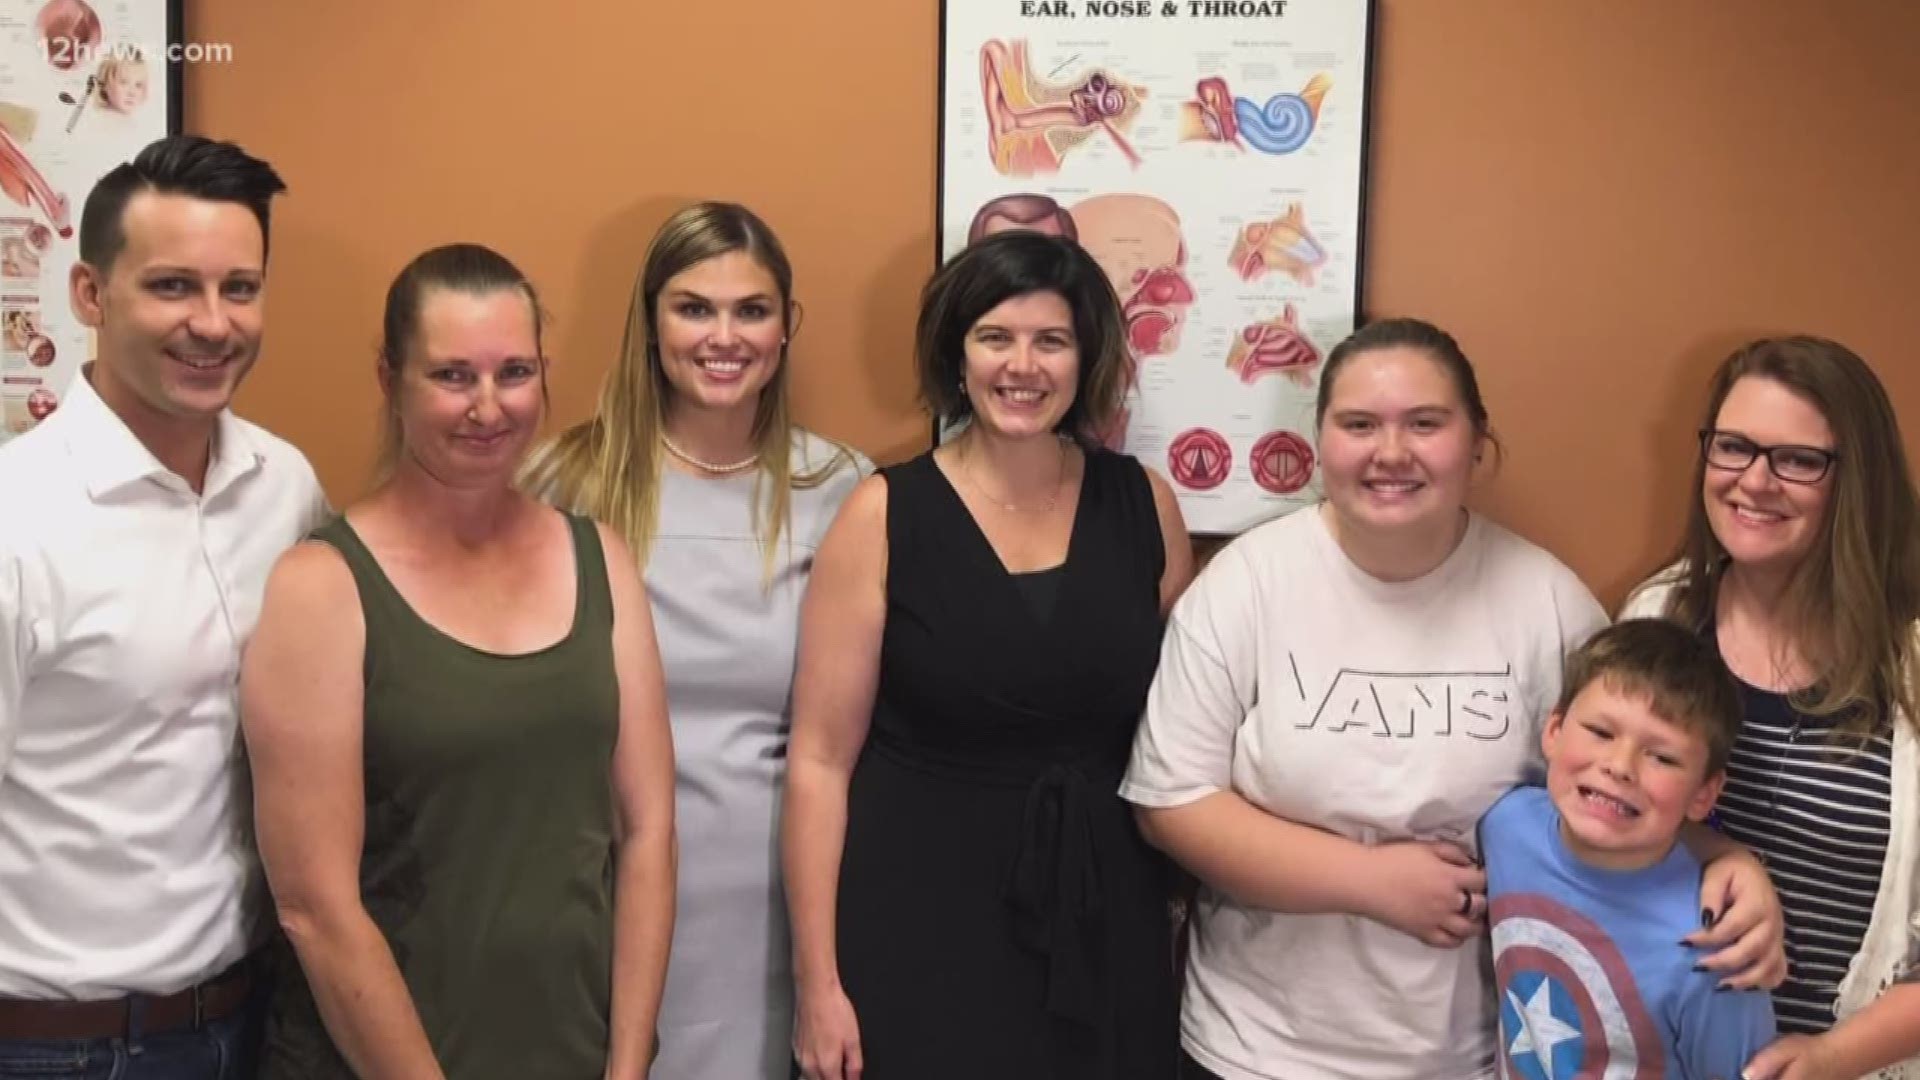 A Valley mom gets the surprise of her life during her daughter’s audiology appointment. Ryan Cody has the touching story.